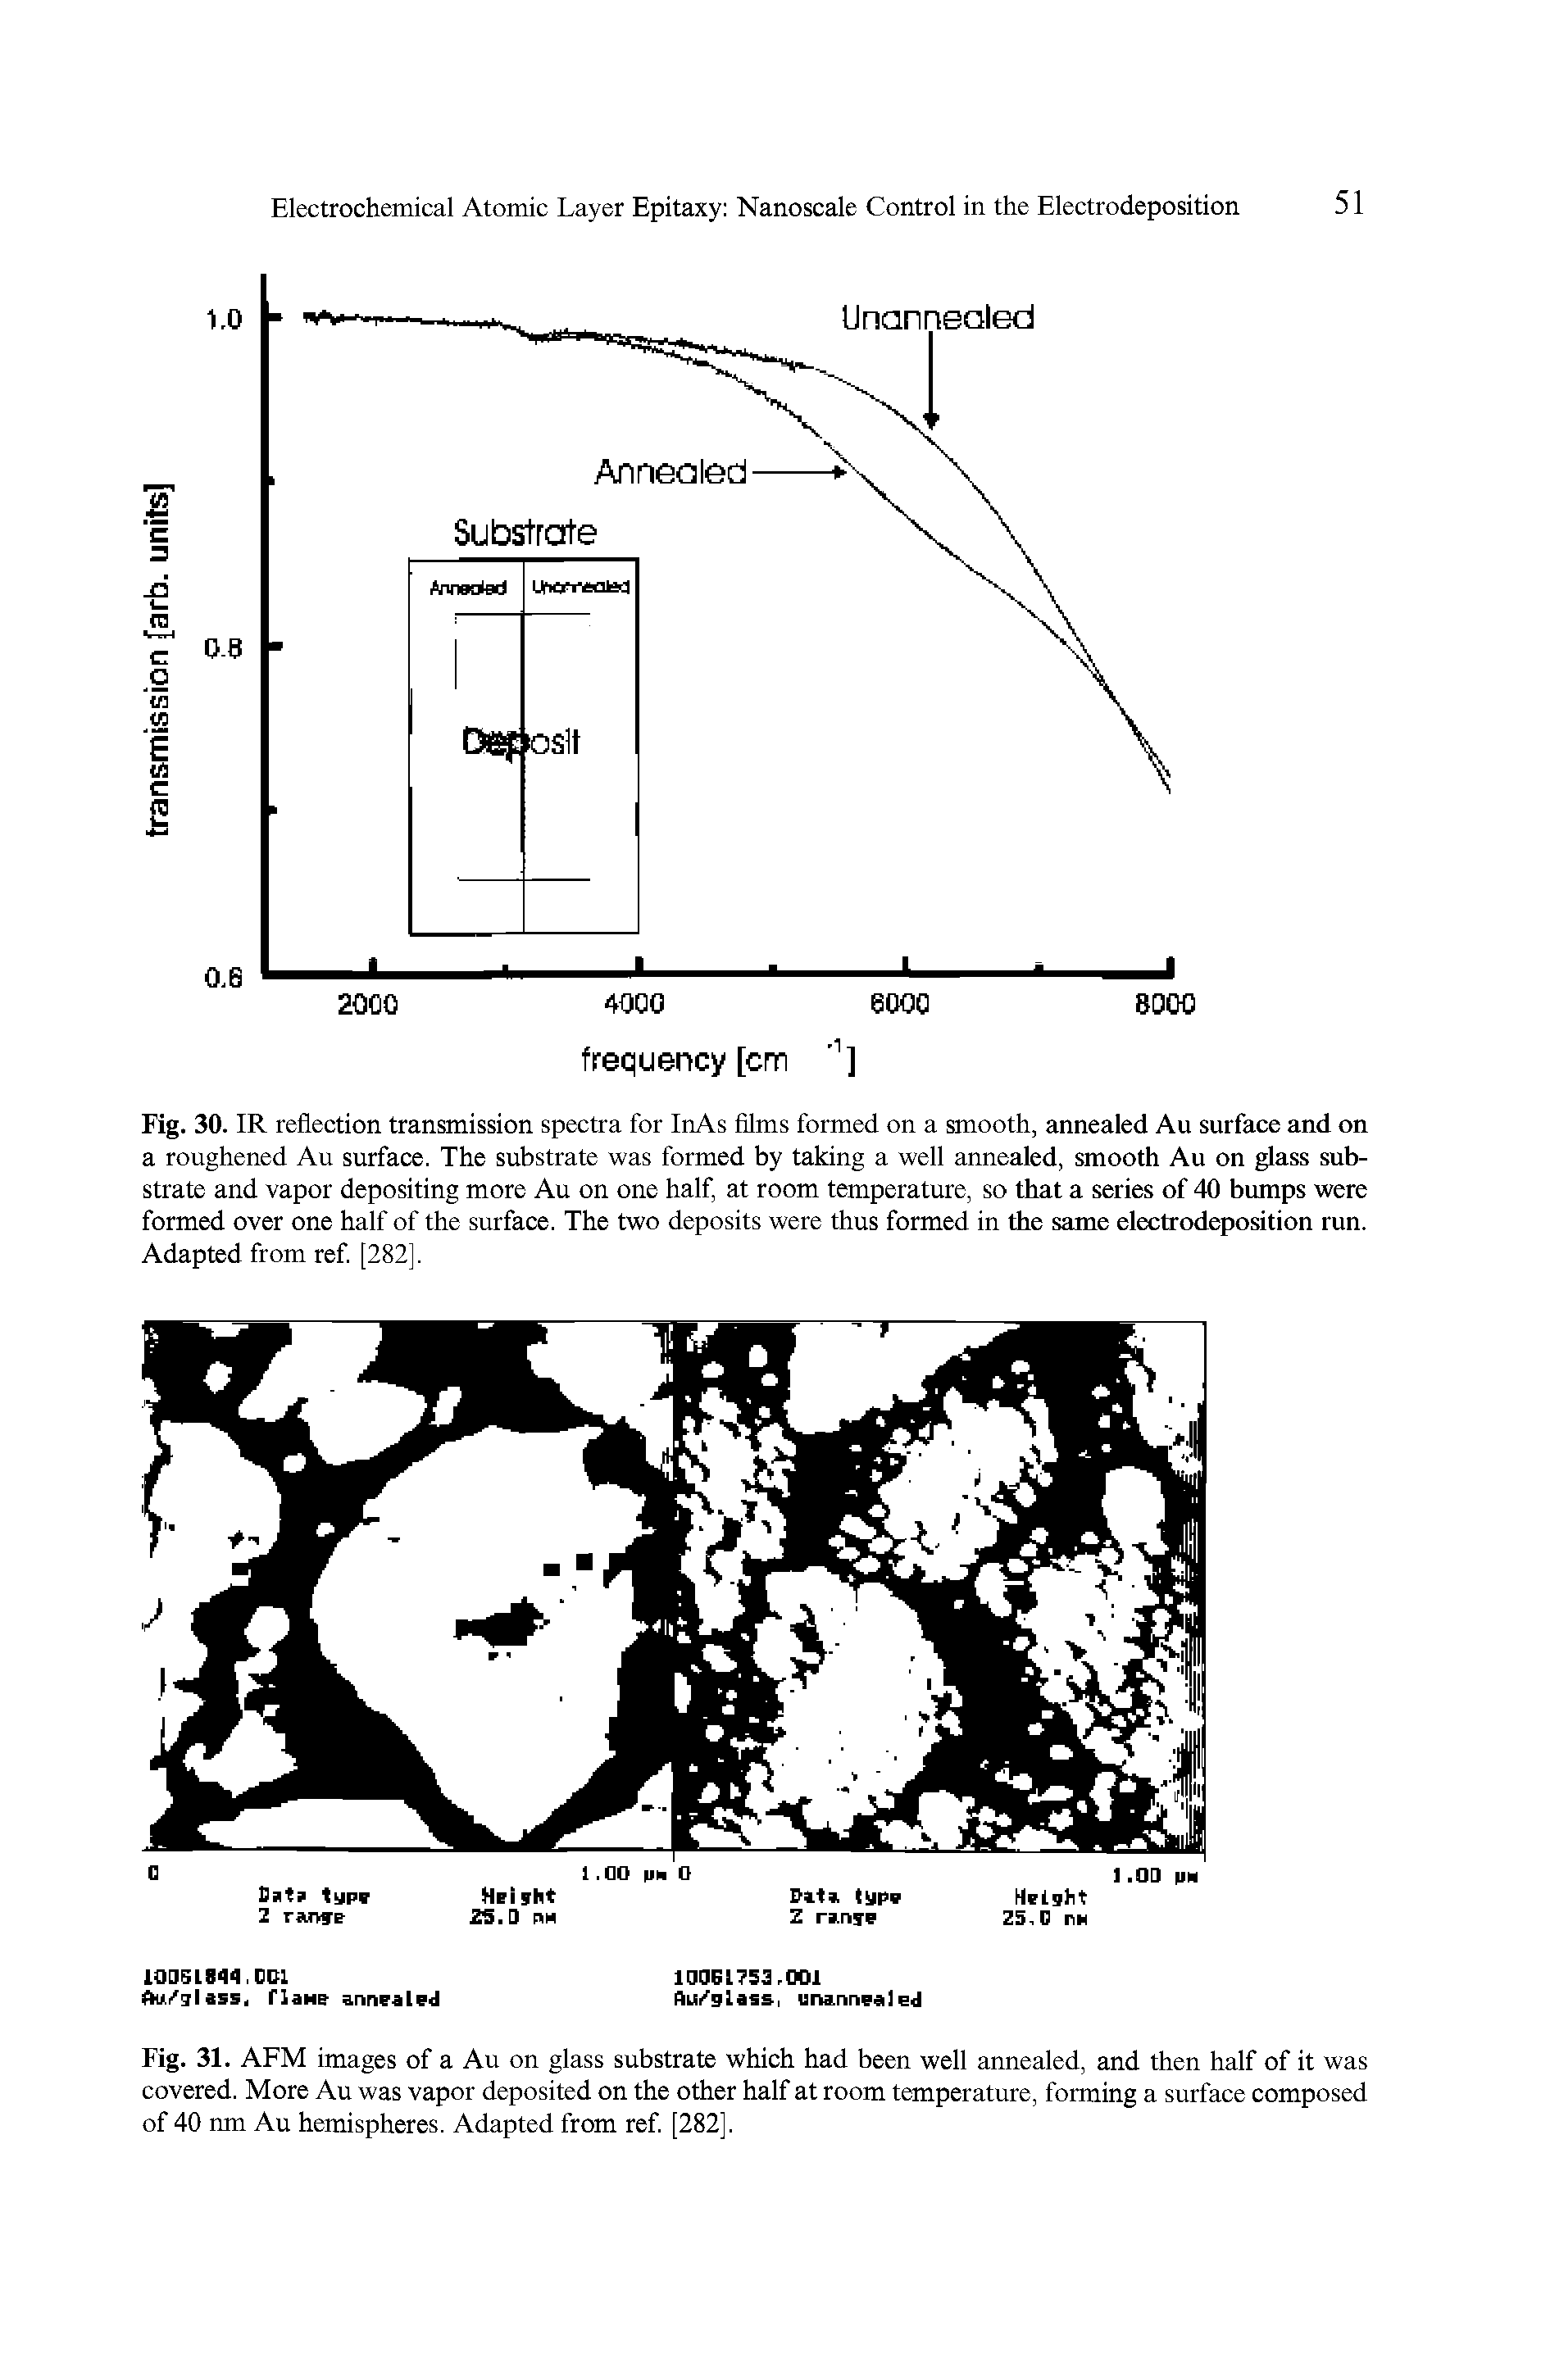 Fig. 31. AFM images of a Au on glass substrate which had been well annealed, and then half of it was covered. More Au was vapor deposited on the other half at room temperature, forming a surface composed of 40 nm Au hemispheres. Adapted from ref. [282],...